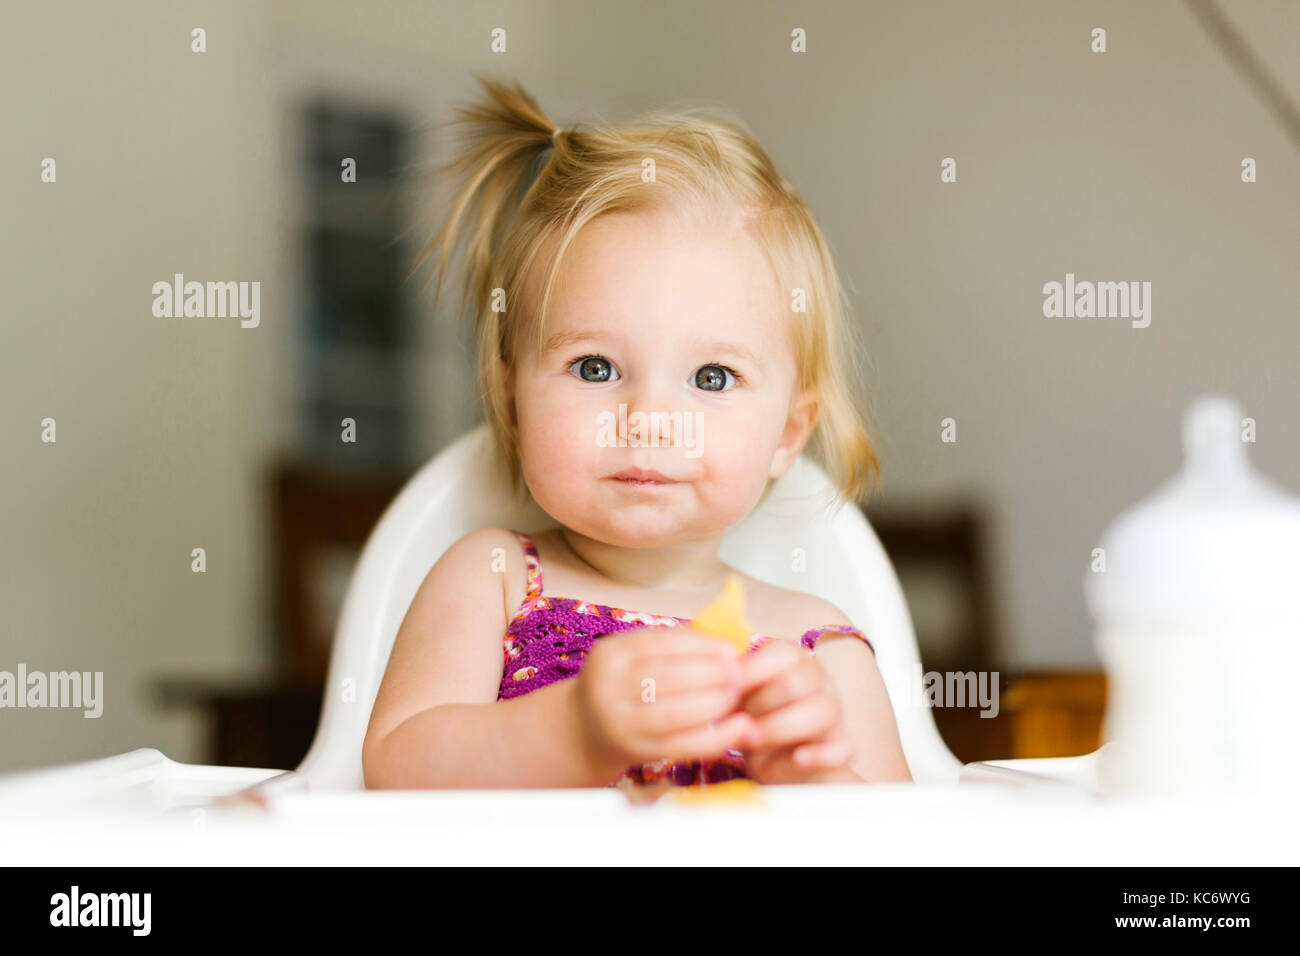 Portrait of baby girl (12-17 months) eating lunch Stock Photo